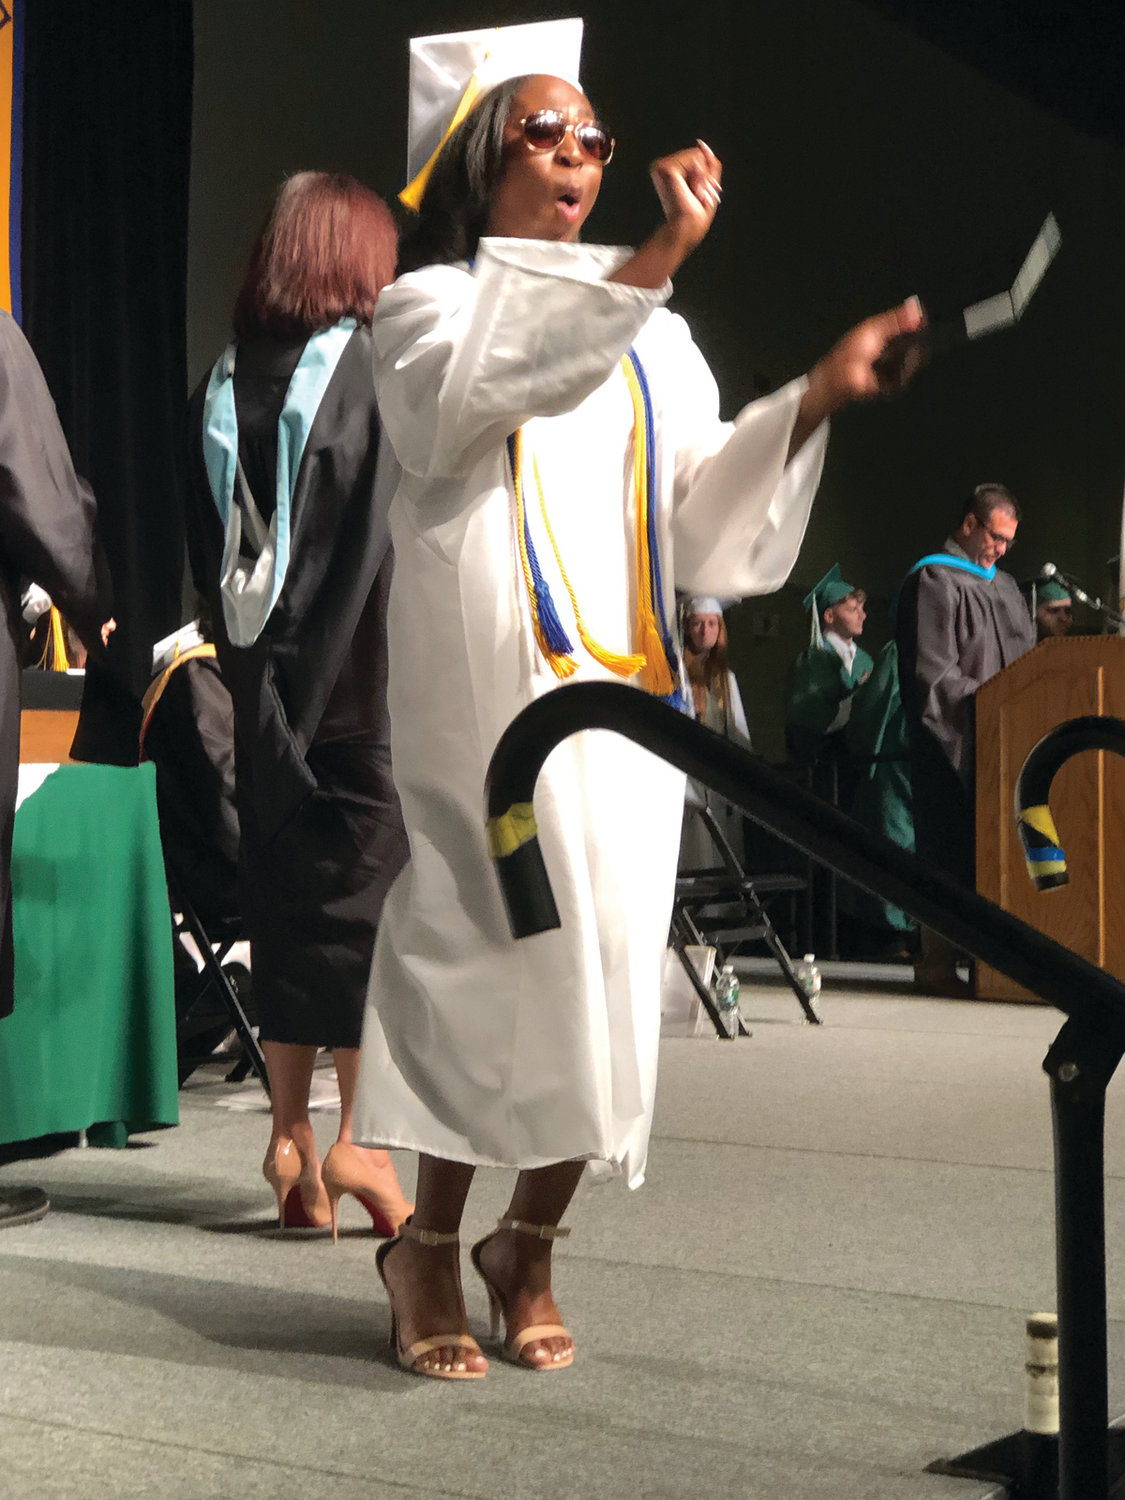 OH, YEAH, I GRADUATED: Showing off her moves, this graduate knows she has a great future ahead.